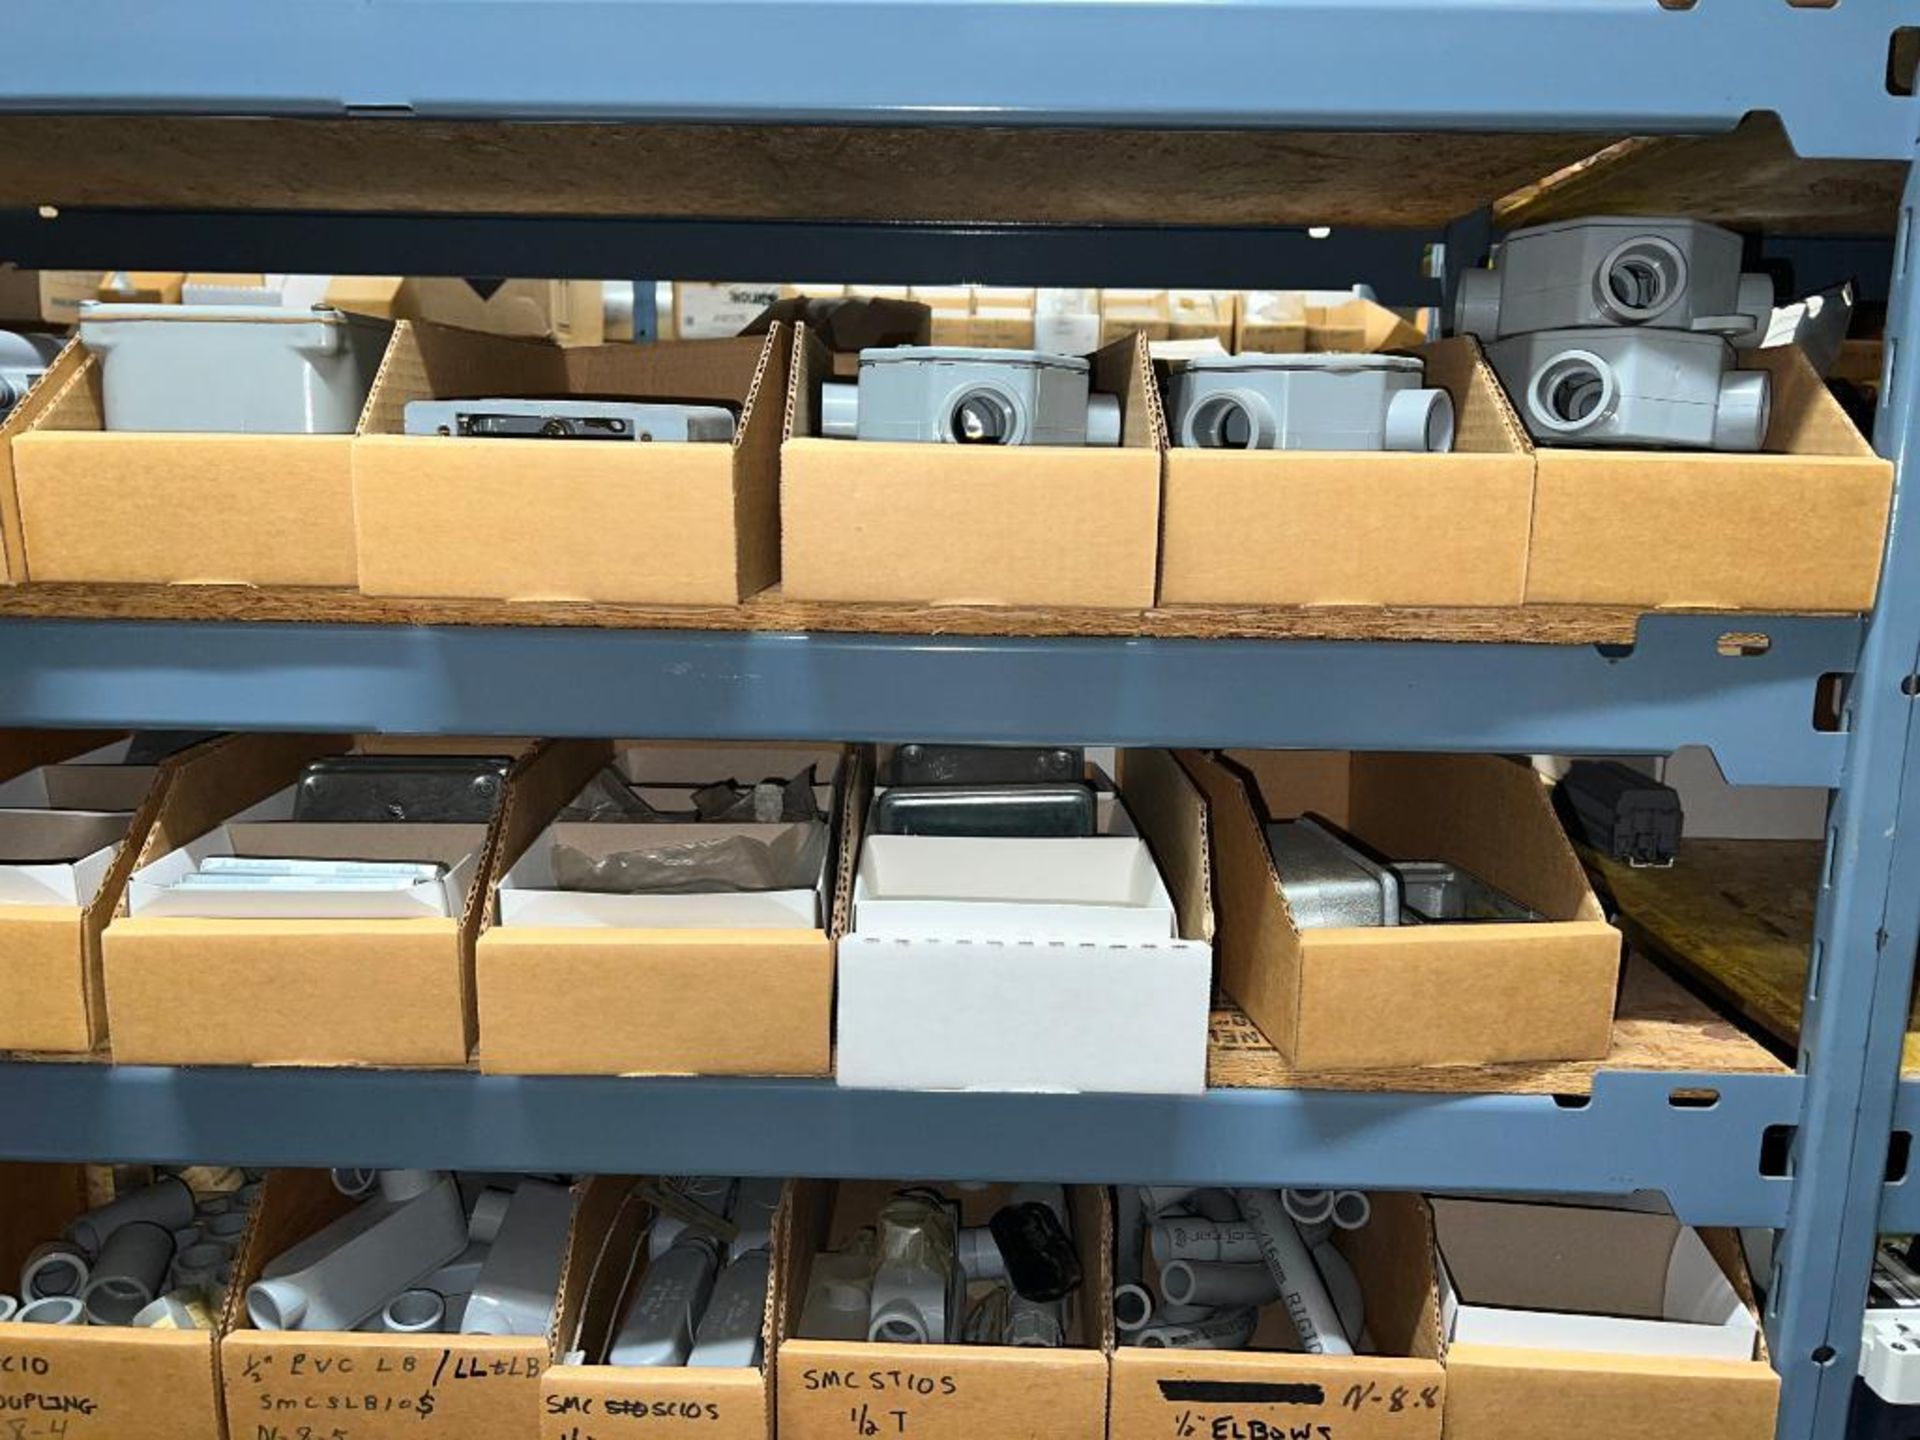 Assorted Electrical Equipment, Including: Circuit Breakers, Conduit, Conduit Adapters and Enclosures - Image 22 of 46